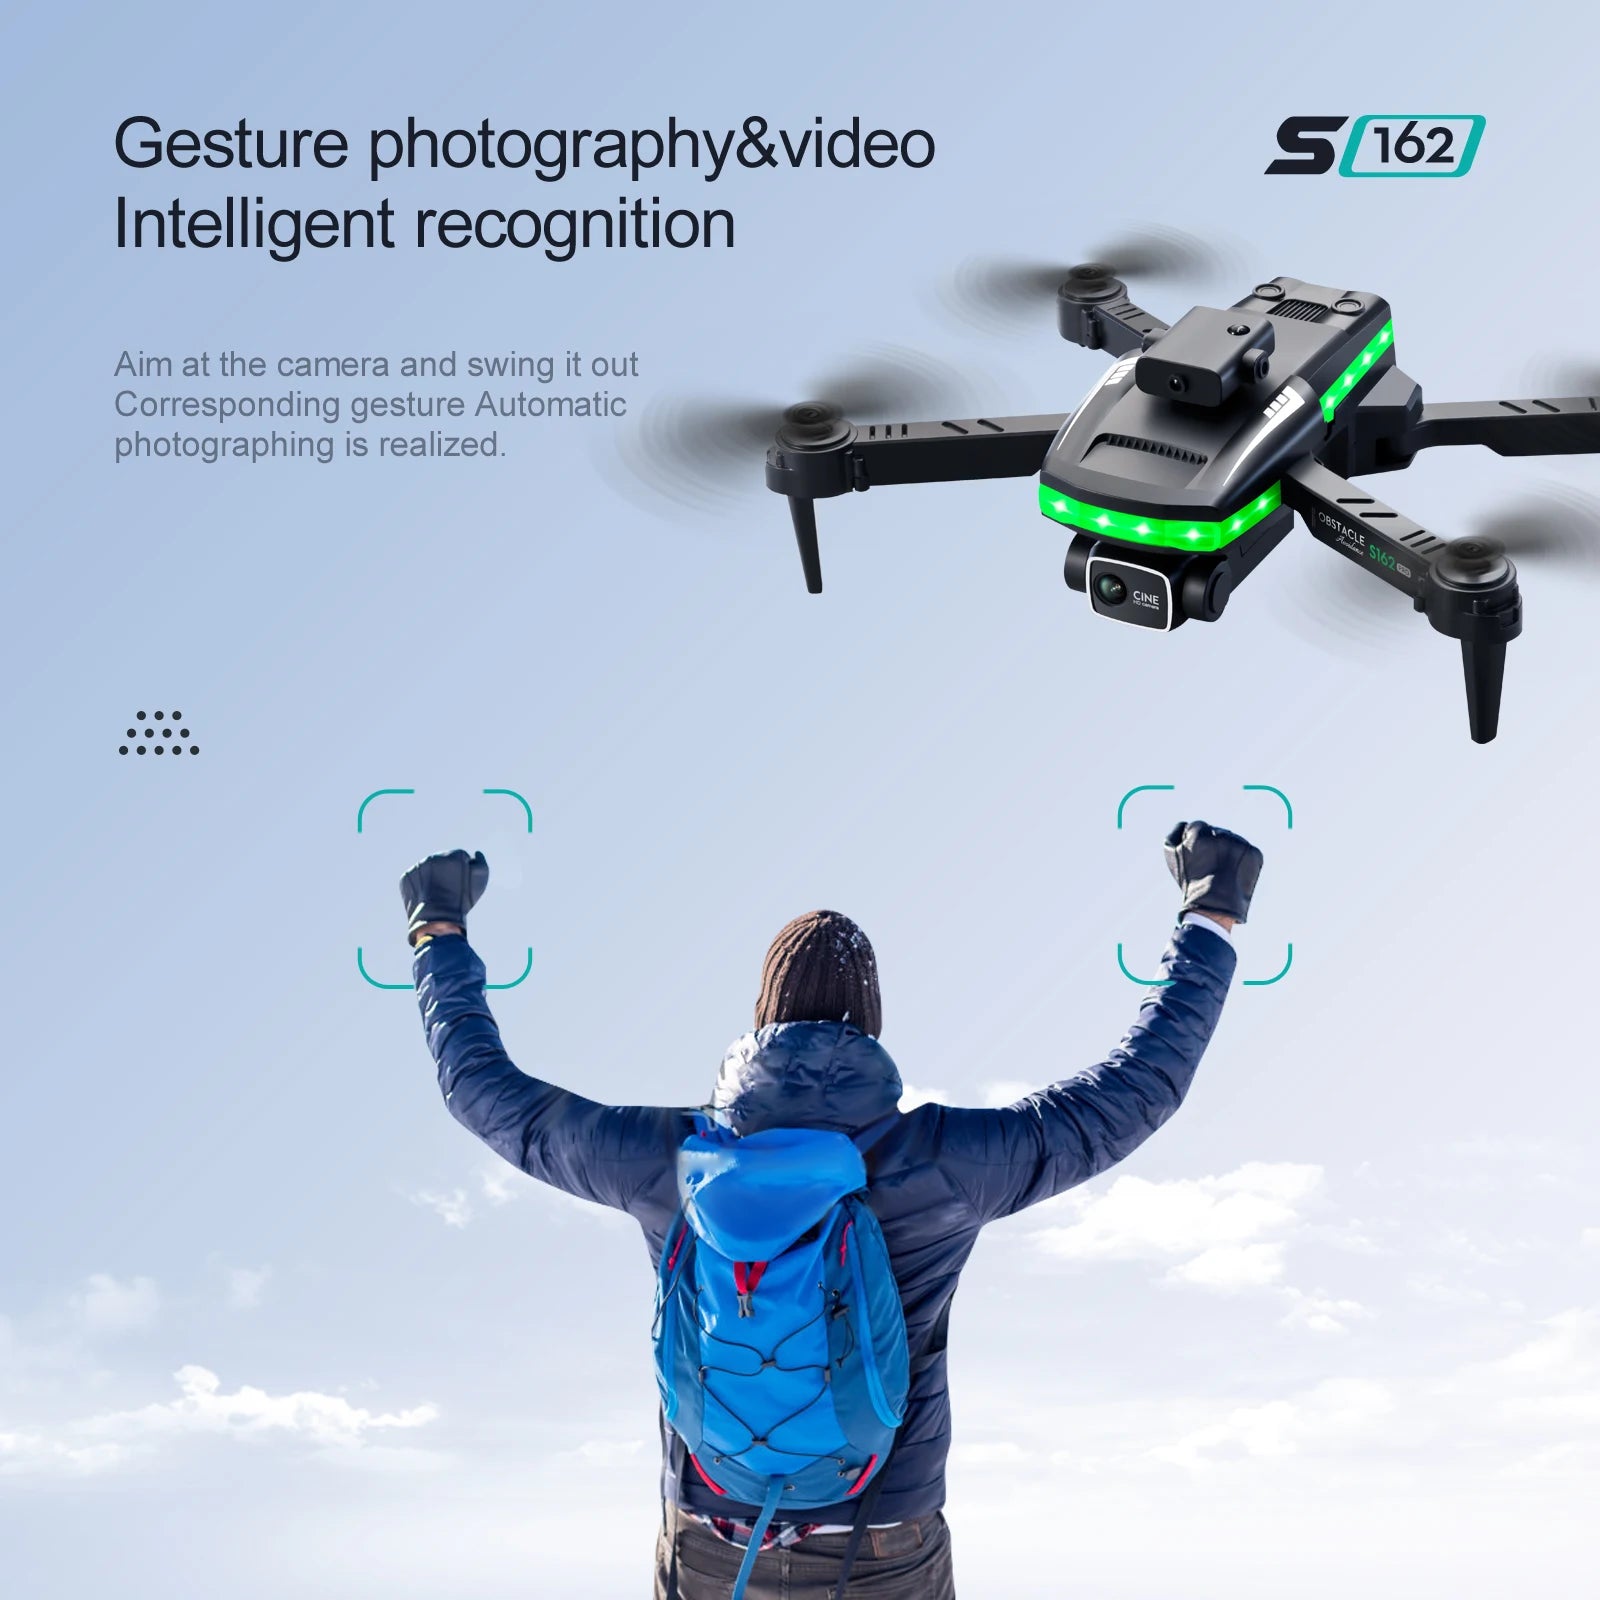 S162 Pro Drone, gesture photography&video 5 162 intelligent recognition aim at the camera and